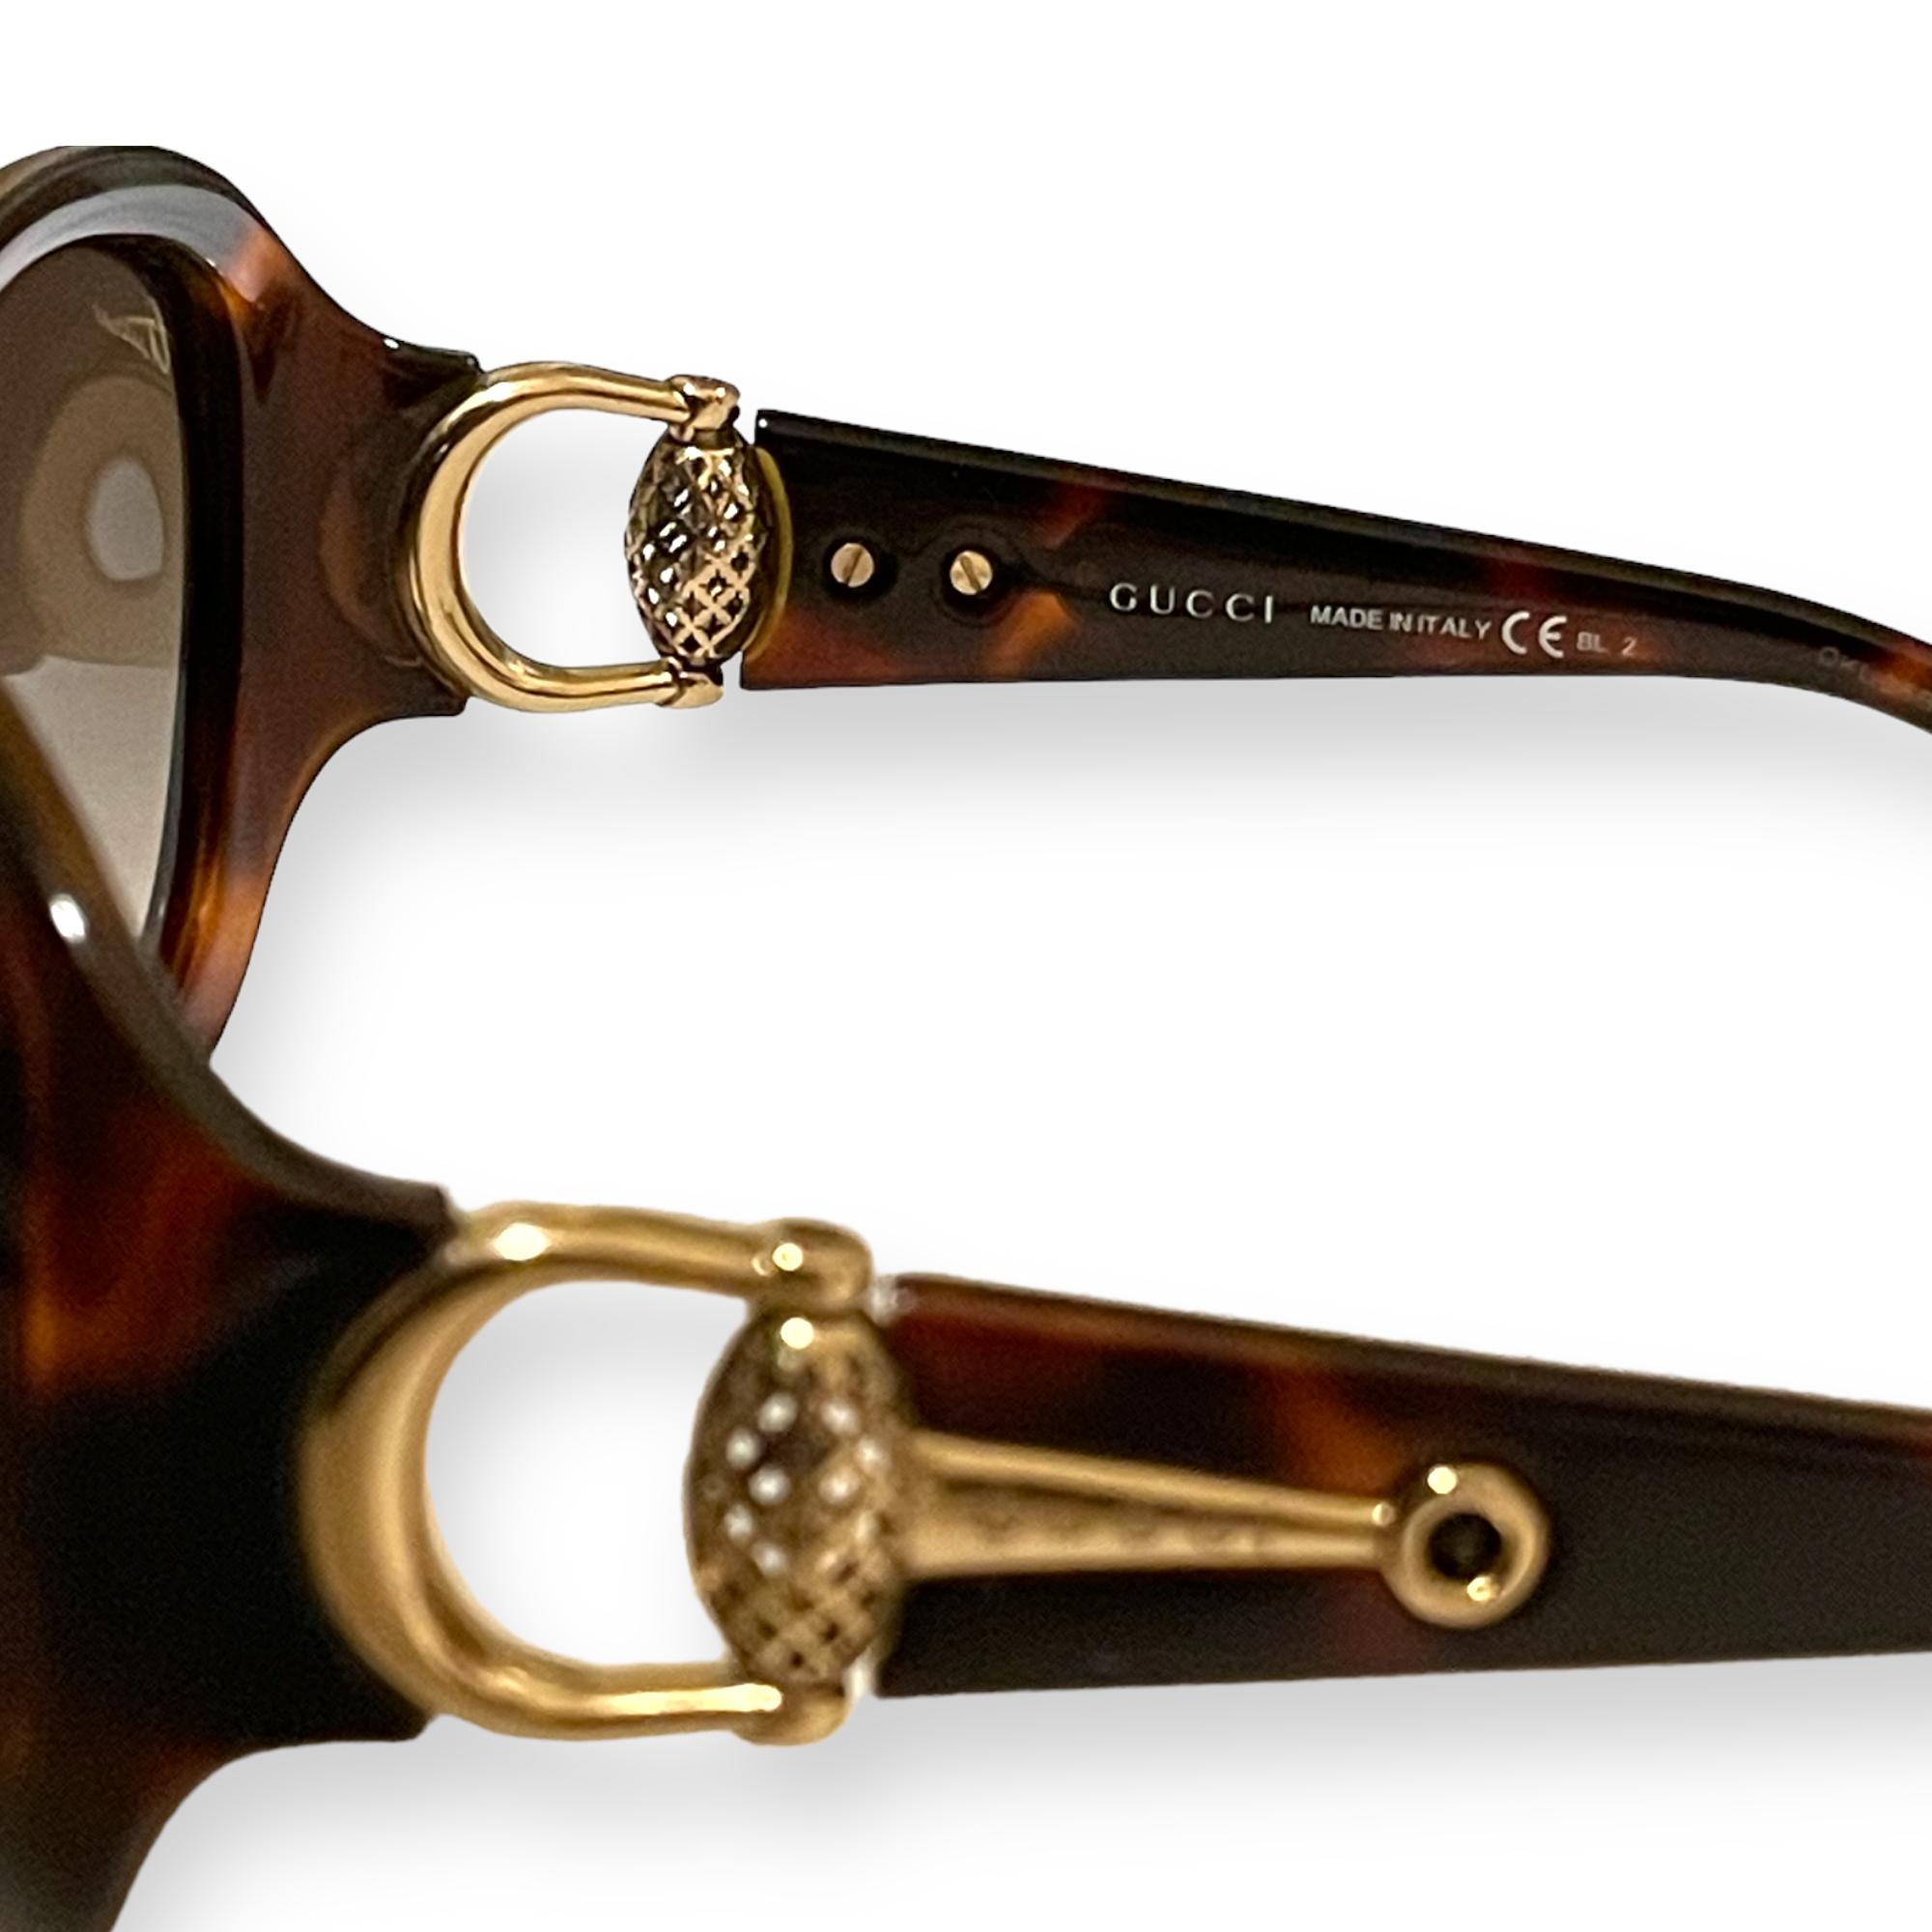 Oversized GUCCI Tortoise Frames with classic gold tone Horse-bit Design